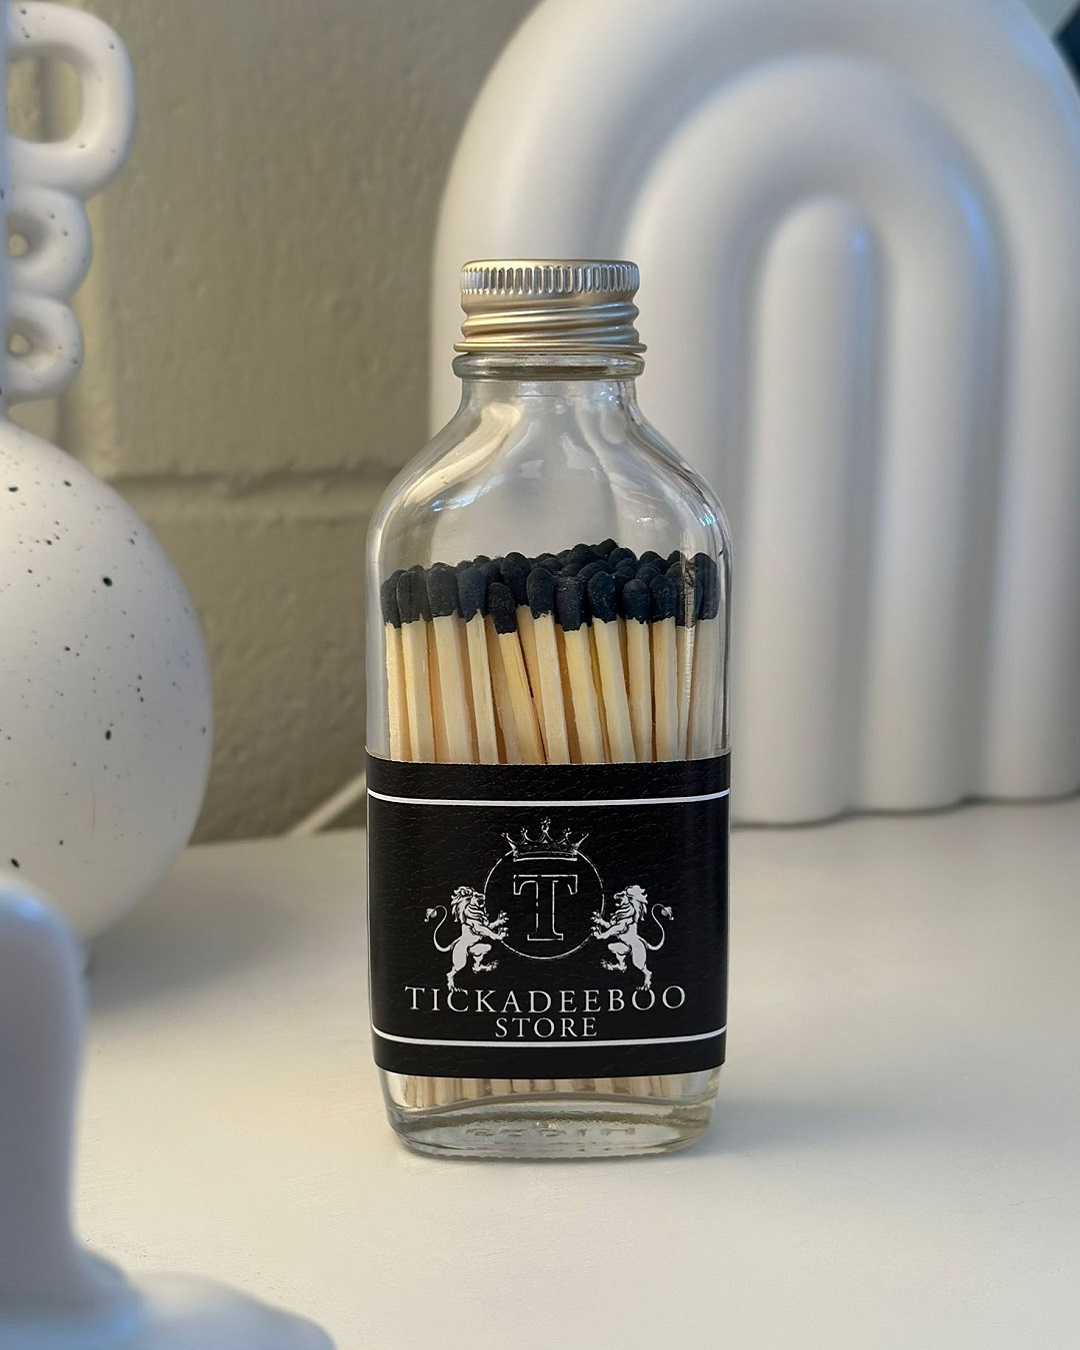 Black matches in a bottle with Tickadeeboo label